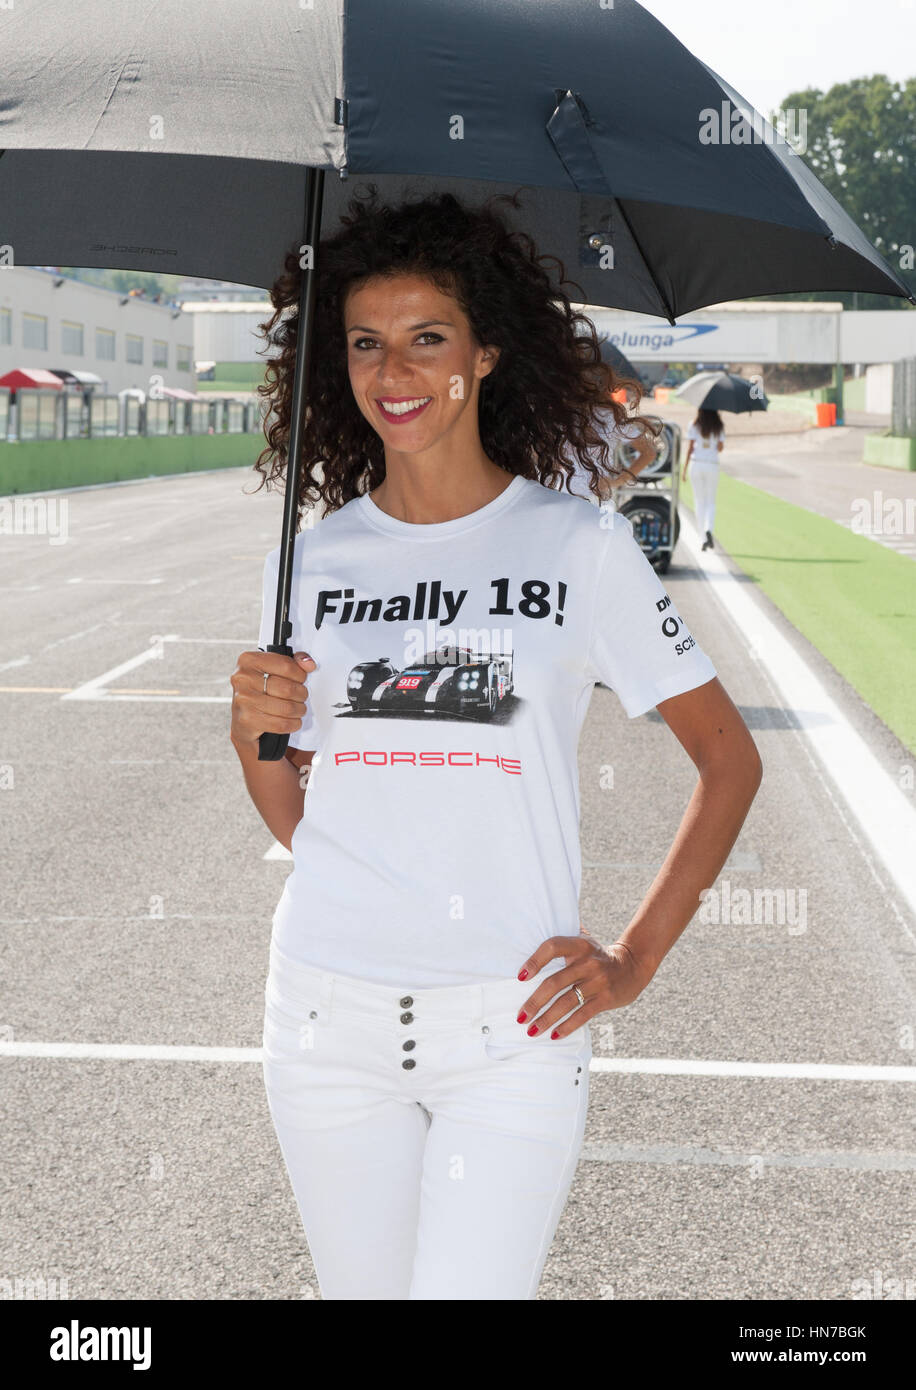 Motorsport T Shirt High Resolution Stock Photography and Images - Alamy